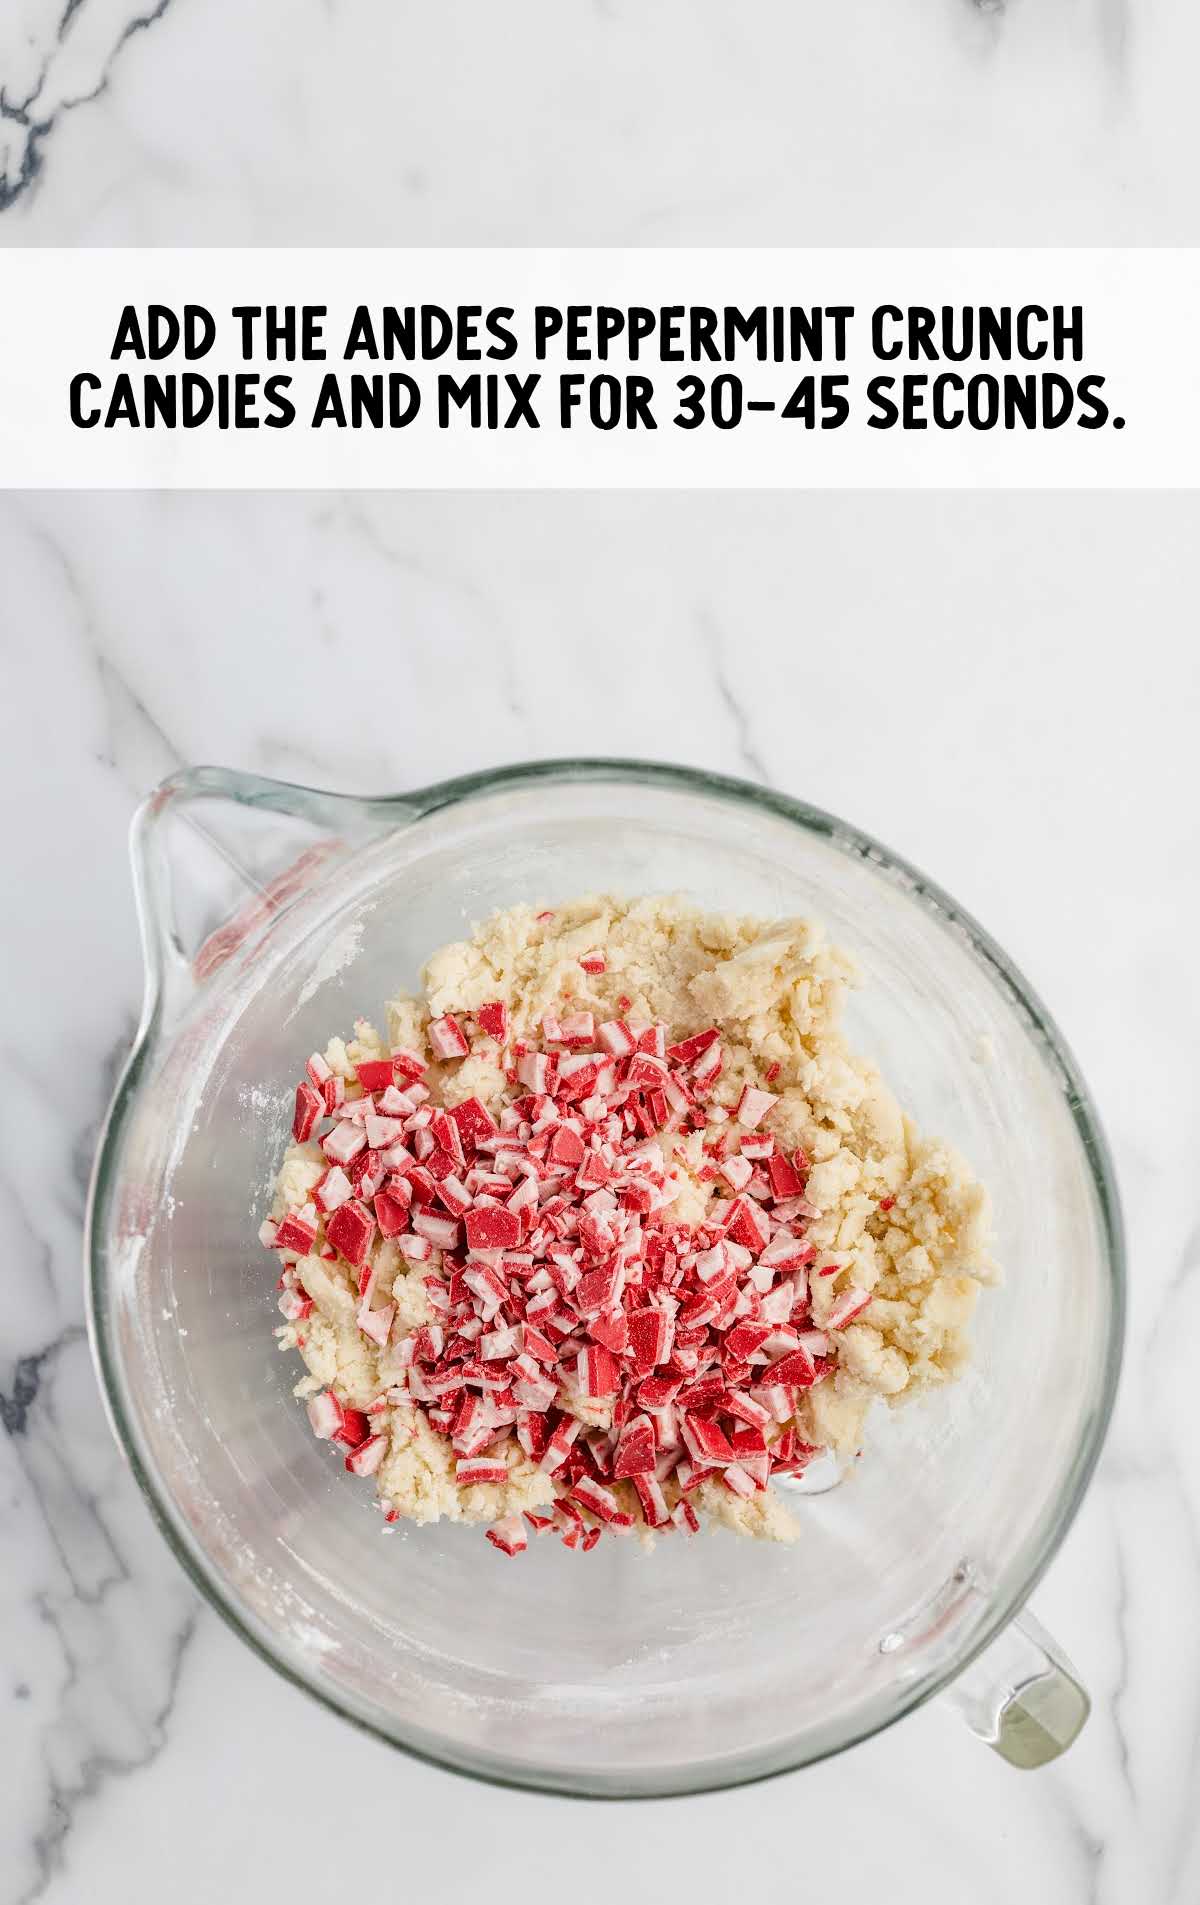 peppermint candies added to the ingredients in the bowl